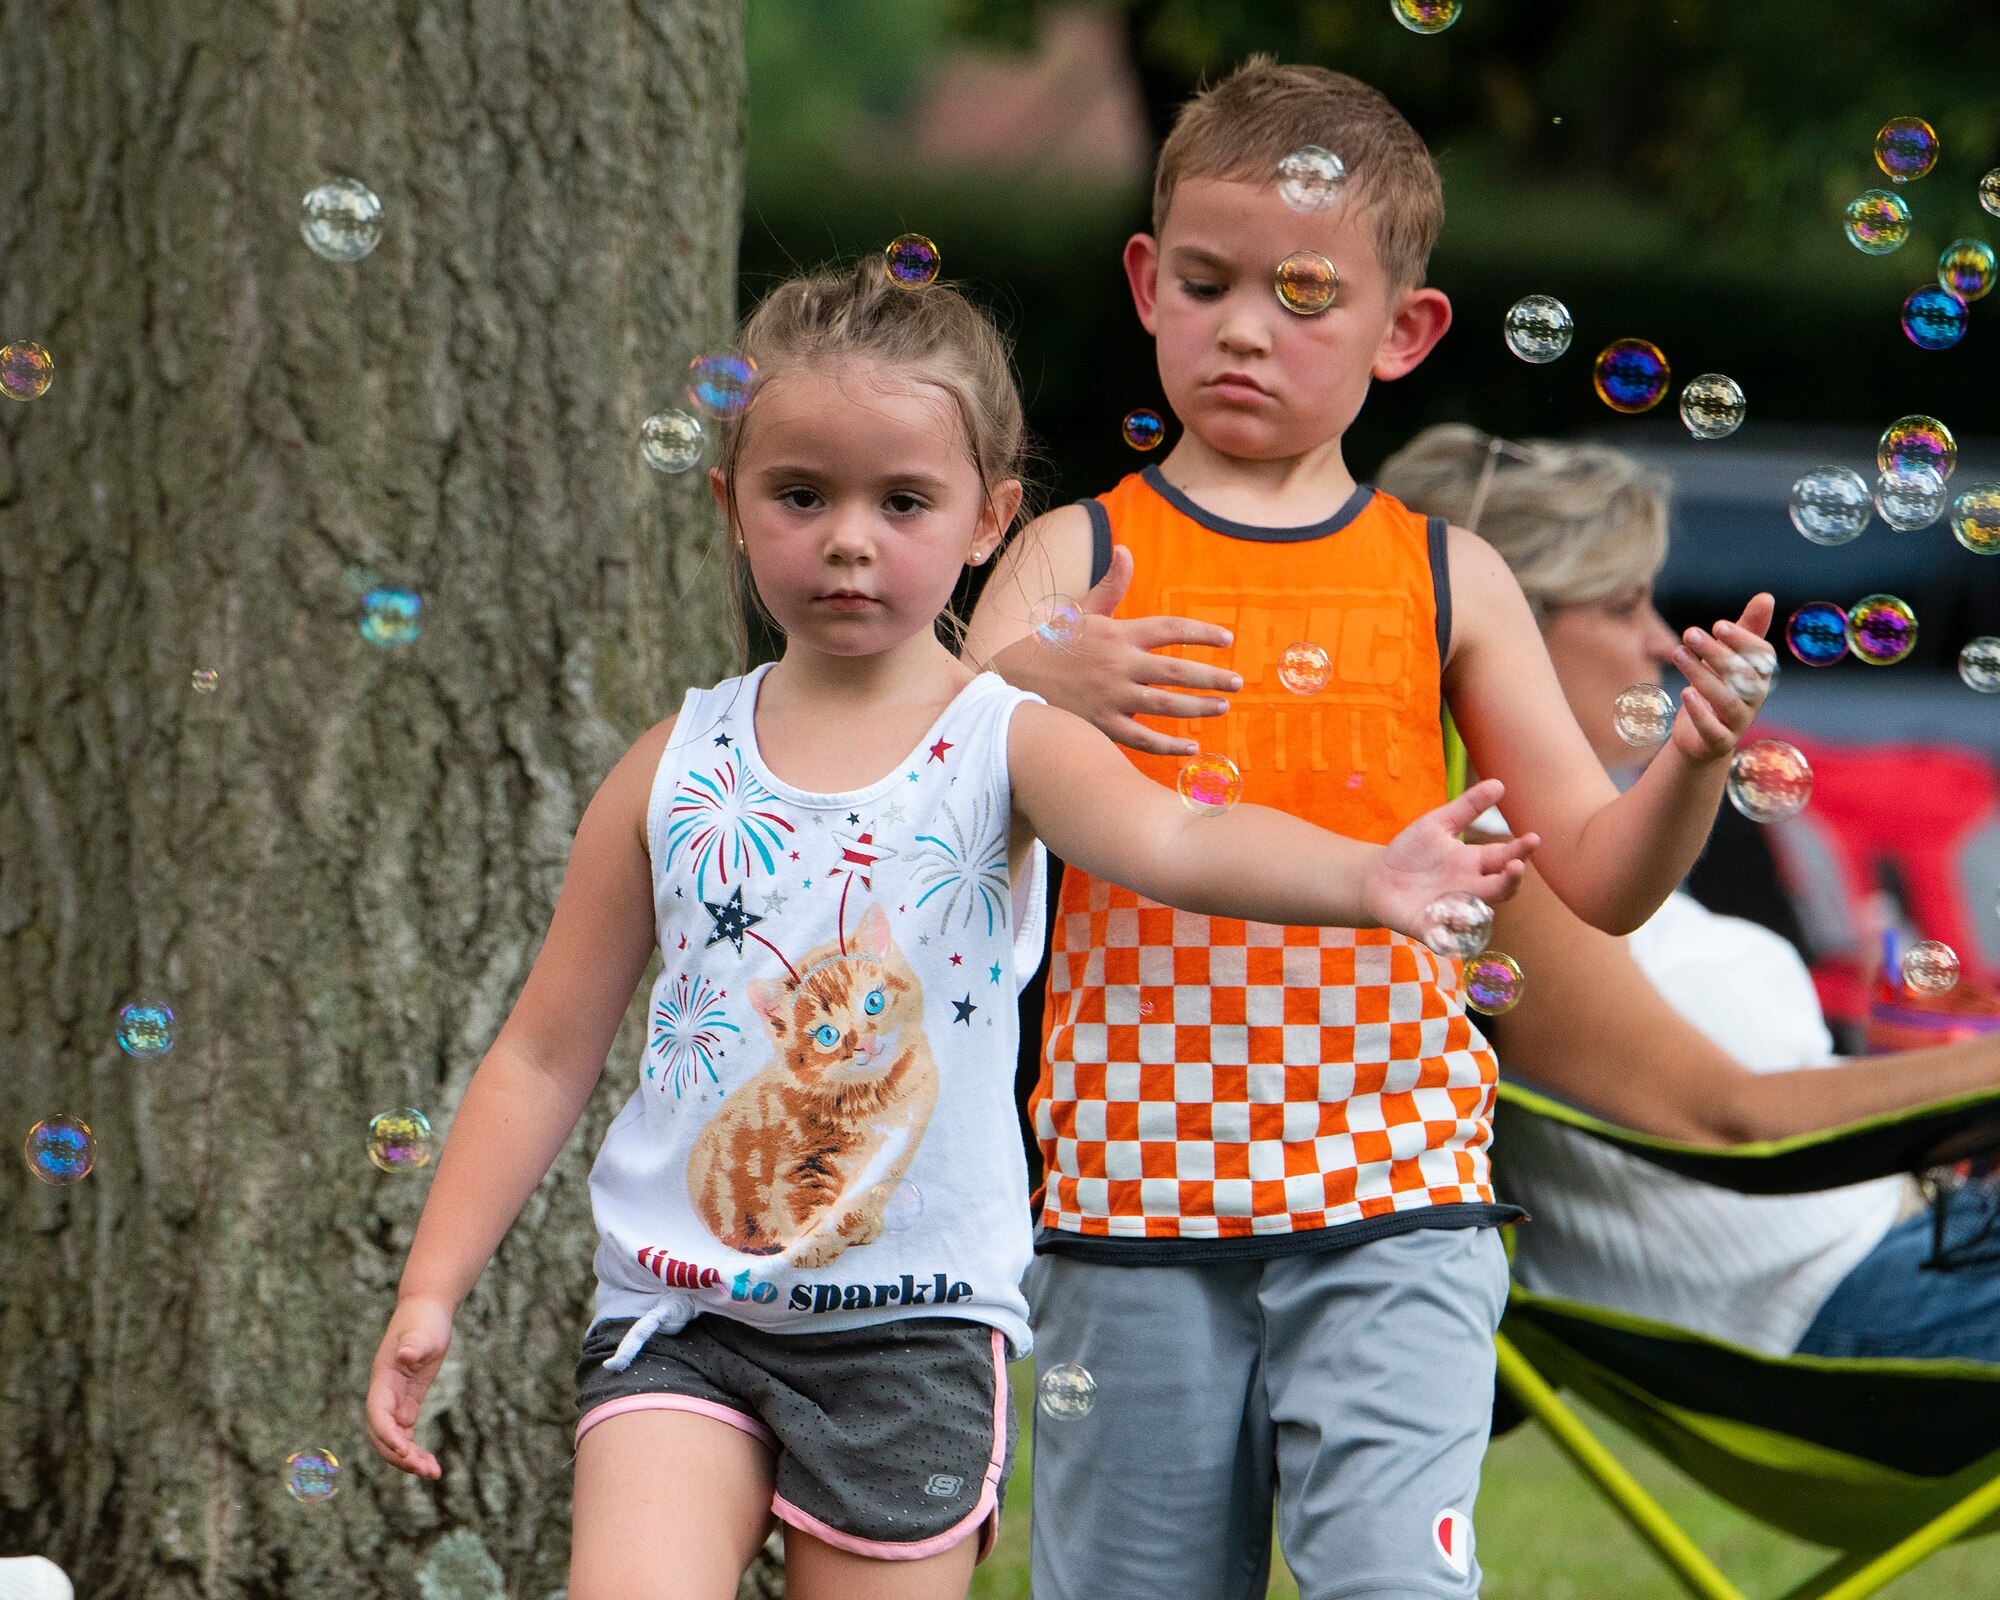 Lily, 5, and Skyler, 7, the children of 1st Lt. Brandon and Amber McVey, play amongst the bubbles at a block party Aug. 12, 2021, put on by the 88th Force Support Squadron in the historic Brick Quarters housing area at Wright-Patterson Air Force Base, Ohio. The party was the middle in a summer series of three sponsored by 88 FSS for Wright-Patt community members. (U.S. Air Force photo by R.J. Oriez)